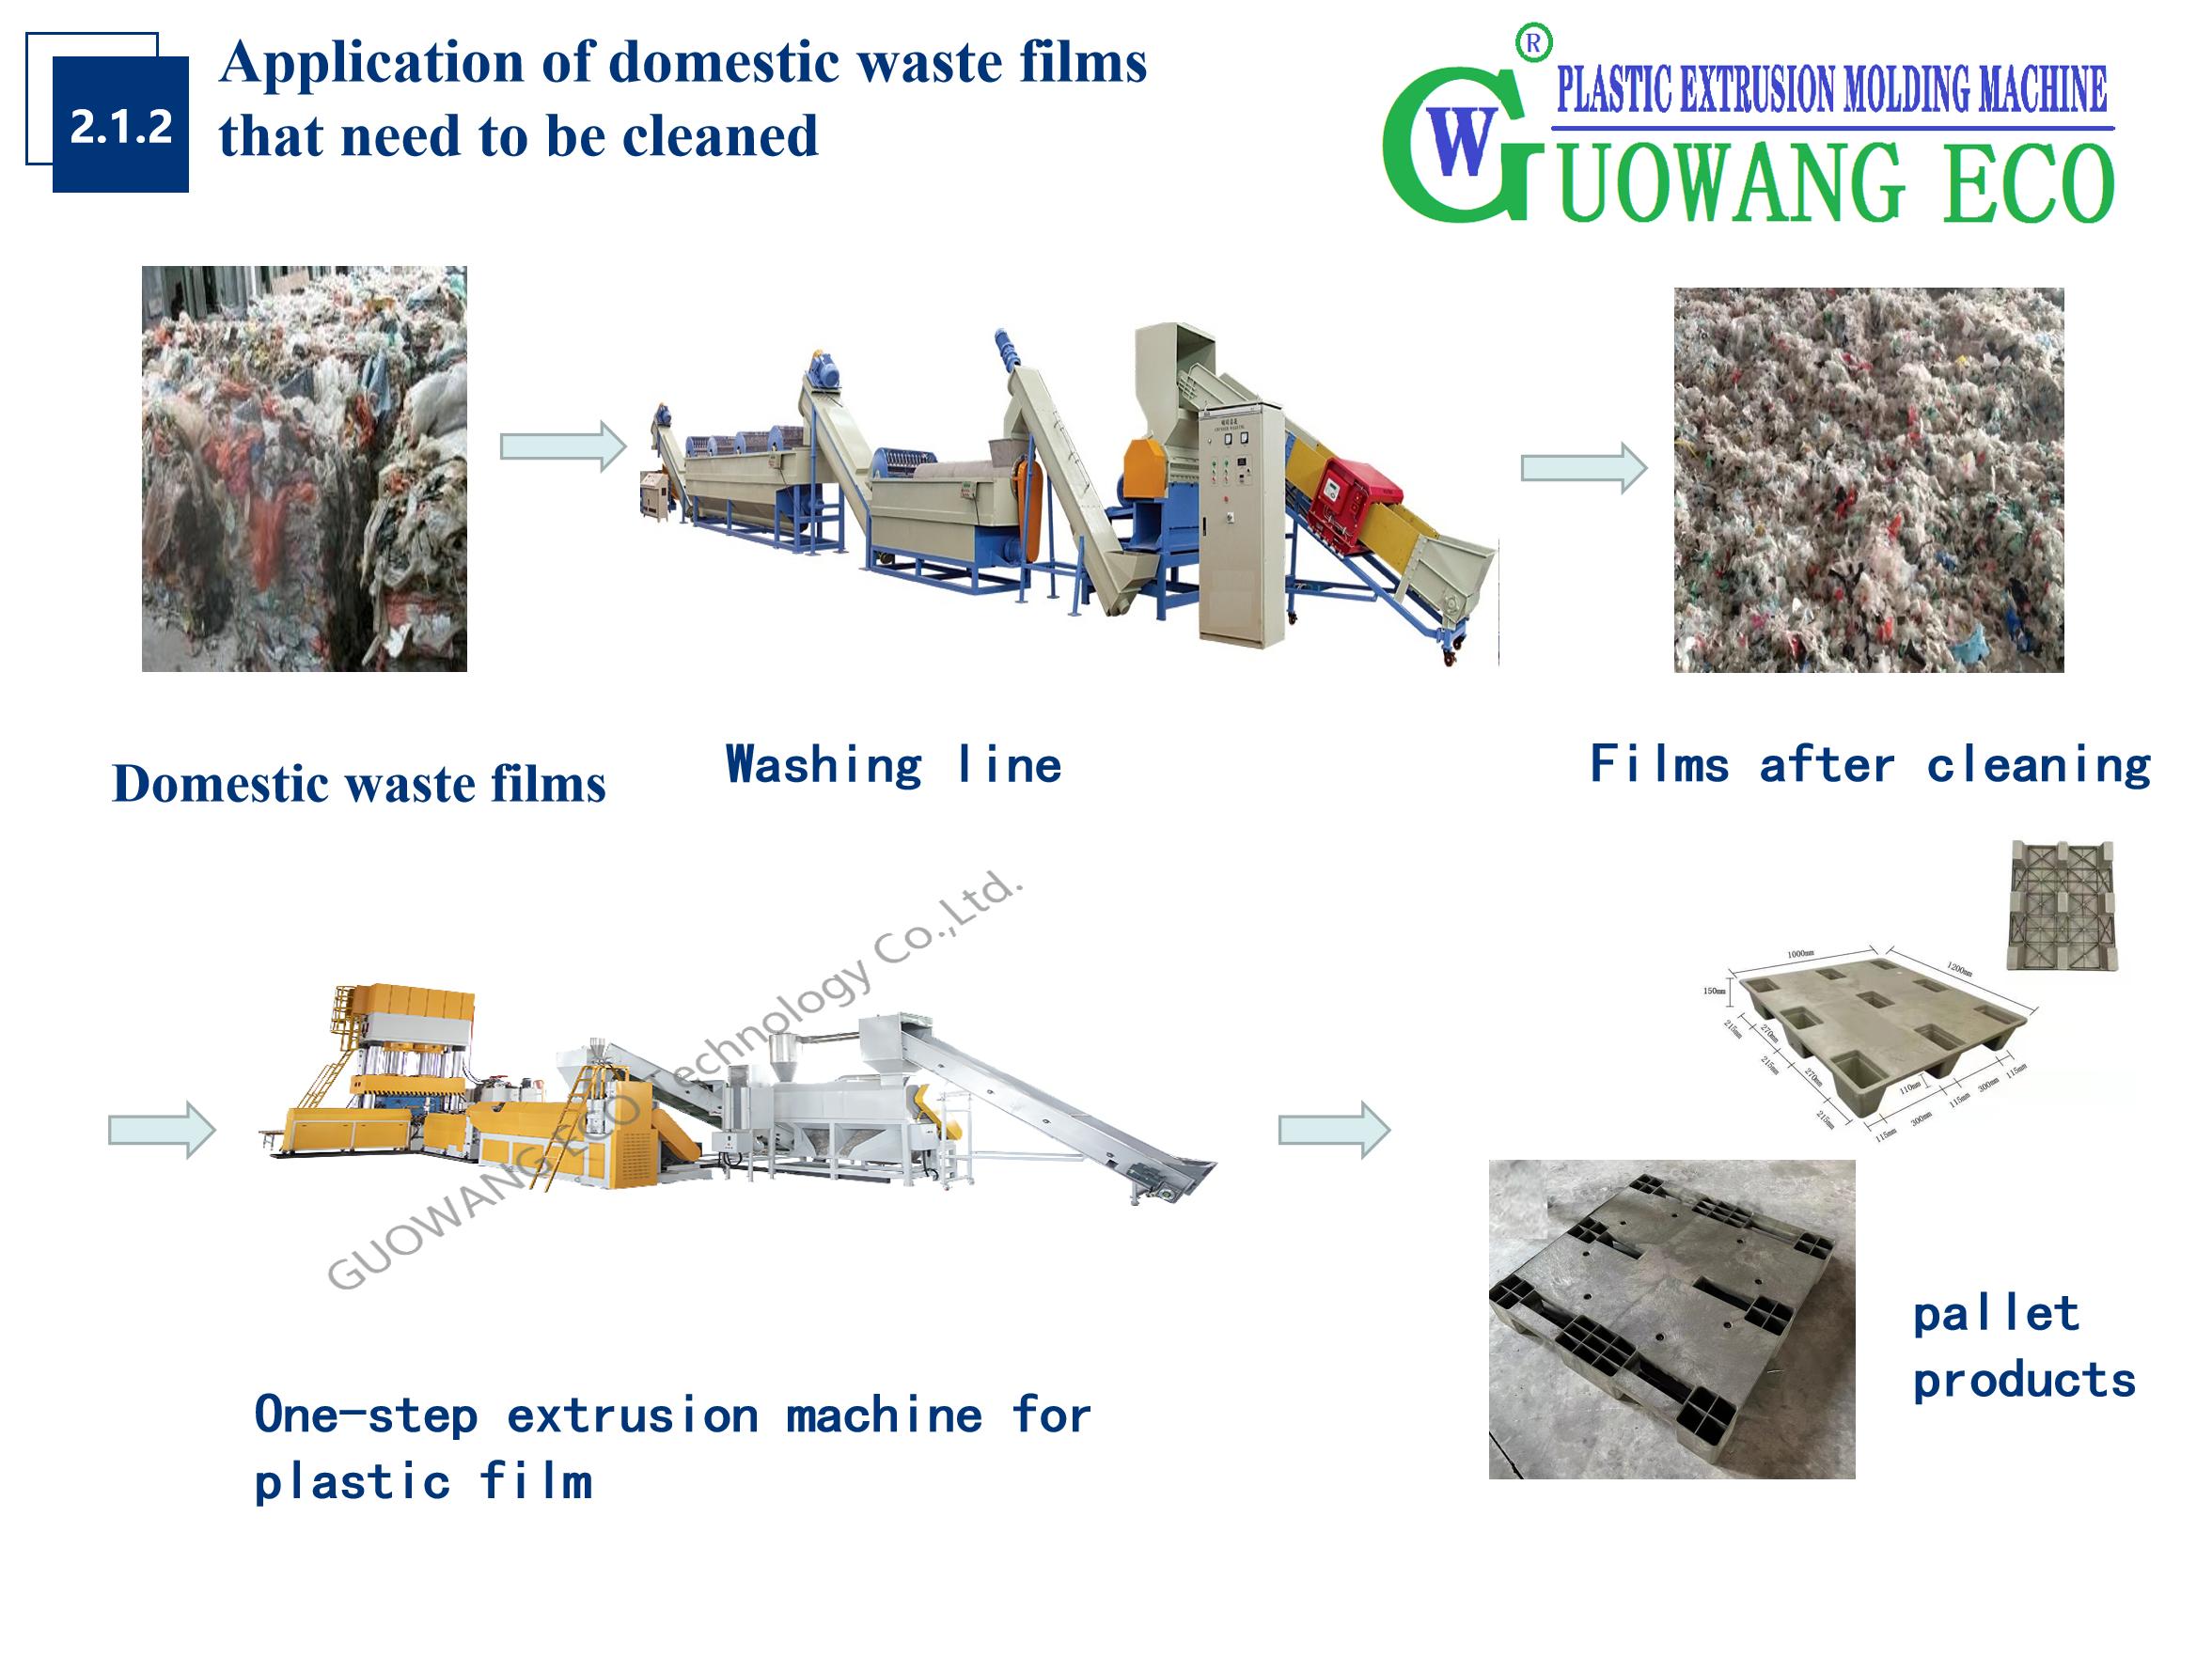 Application_of_domestic_waste_films_that_need_to_be_cleaned.jpg